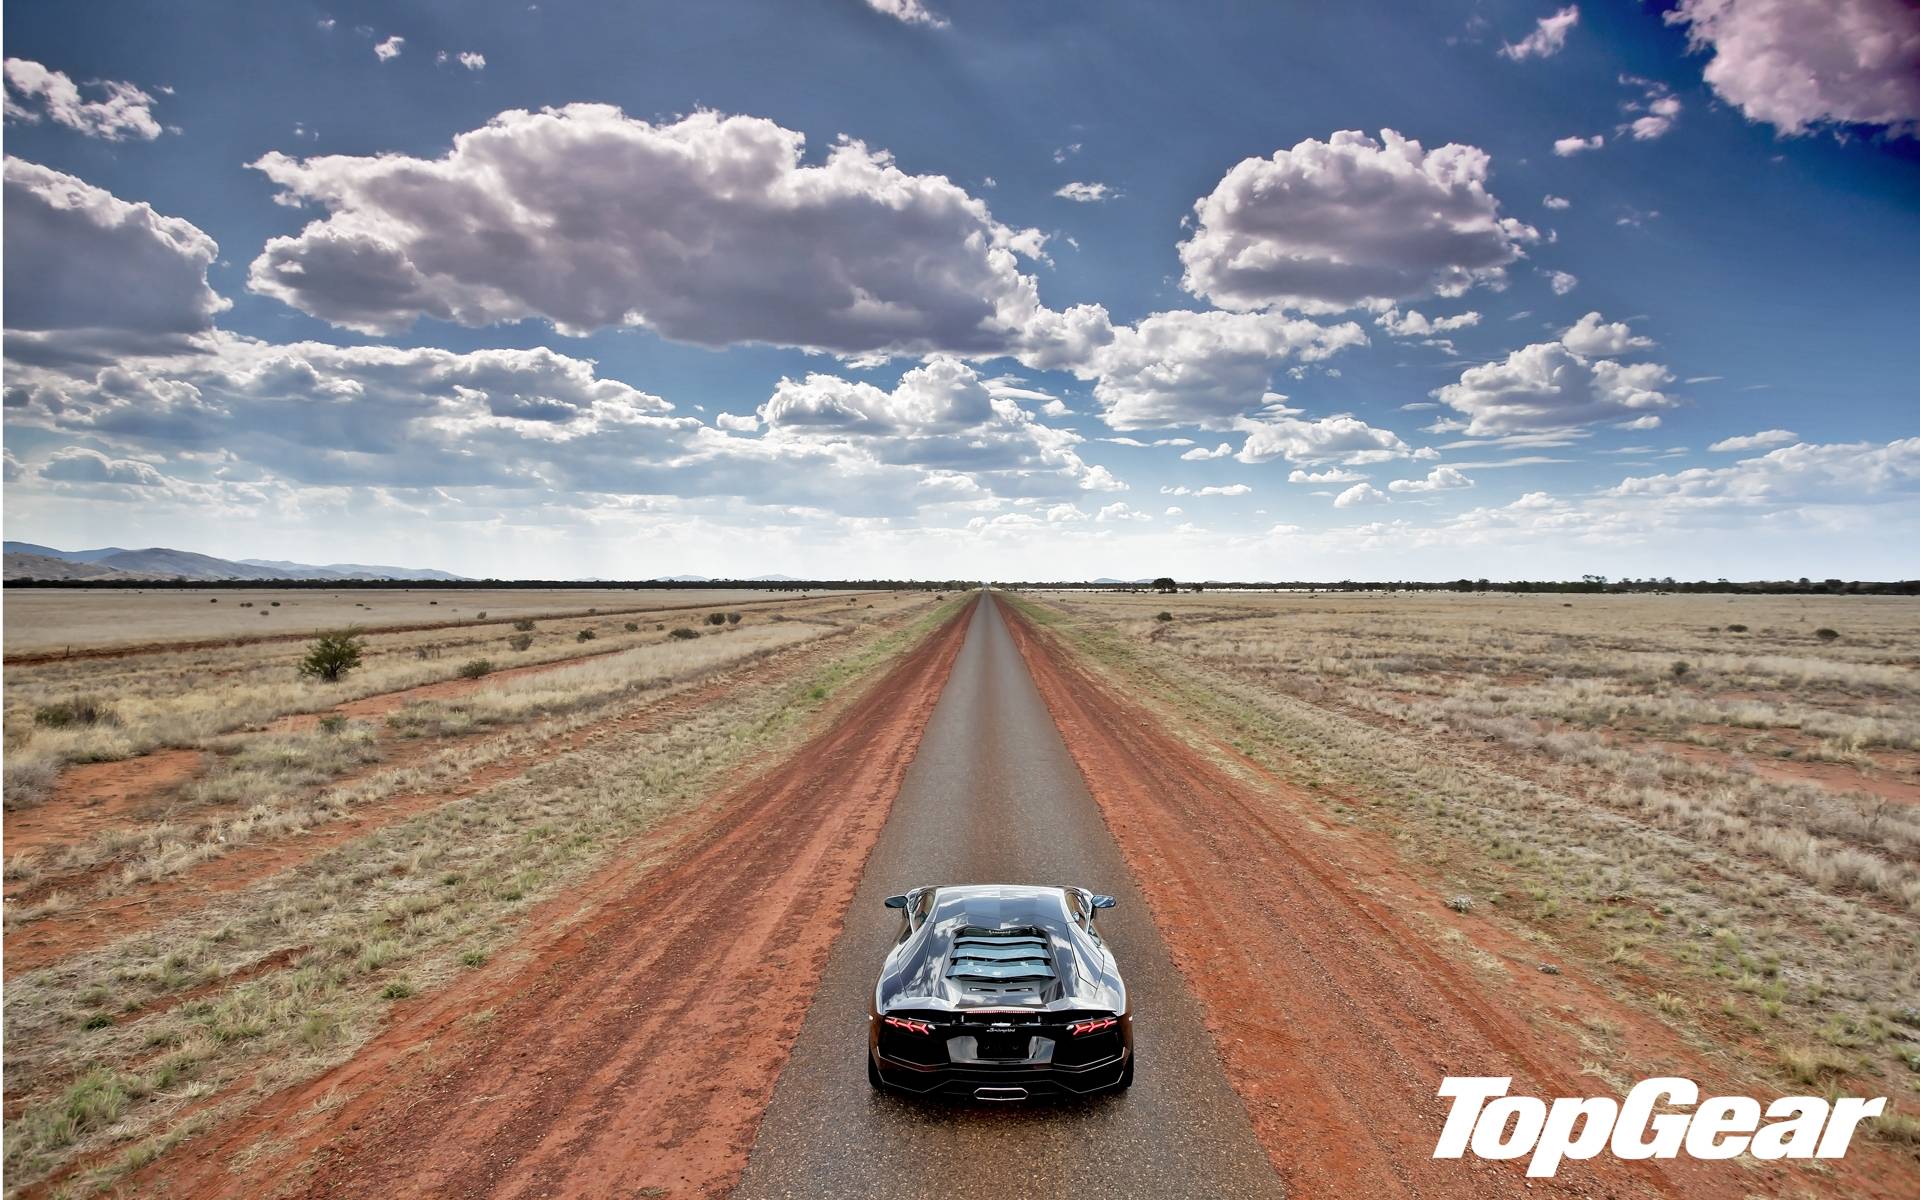 image For > Top Gear Wallpaper Of The Week